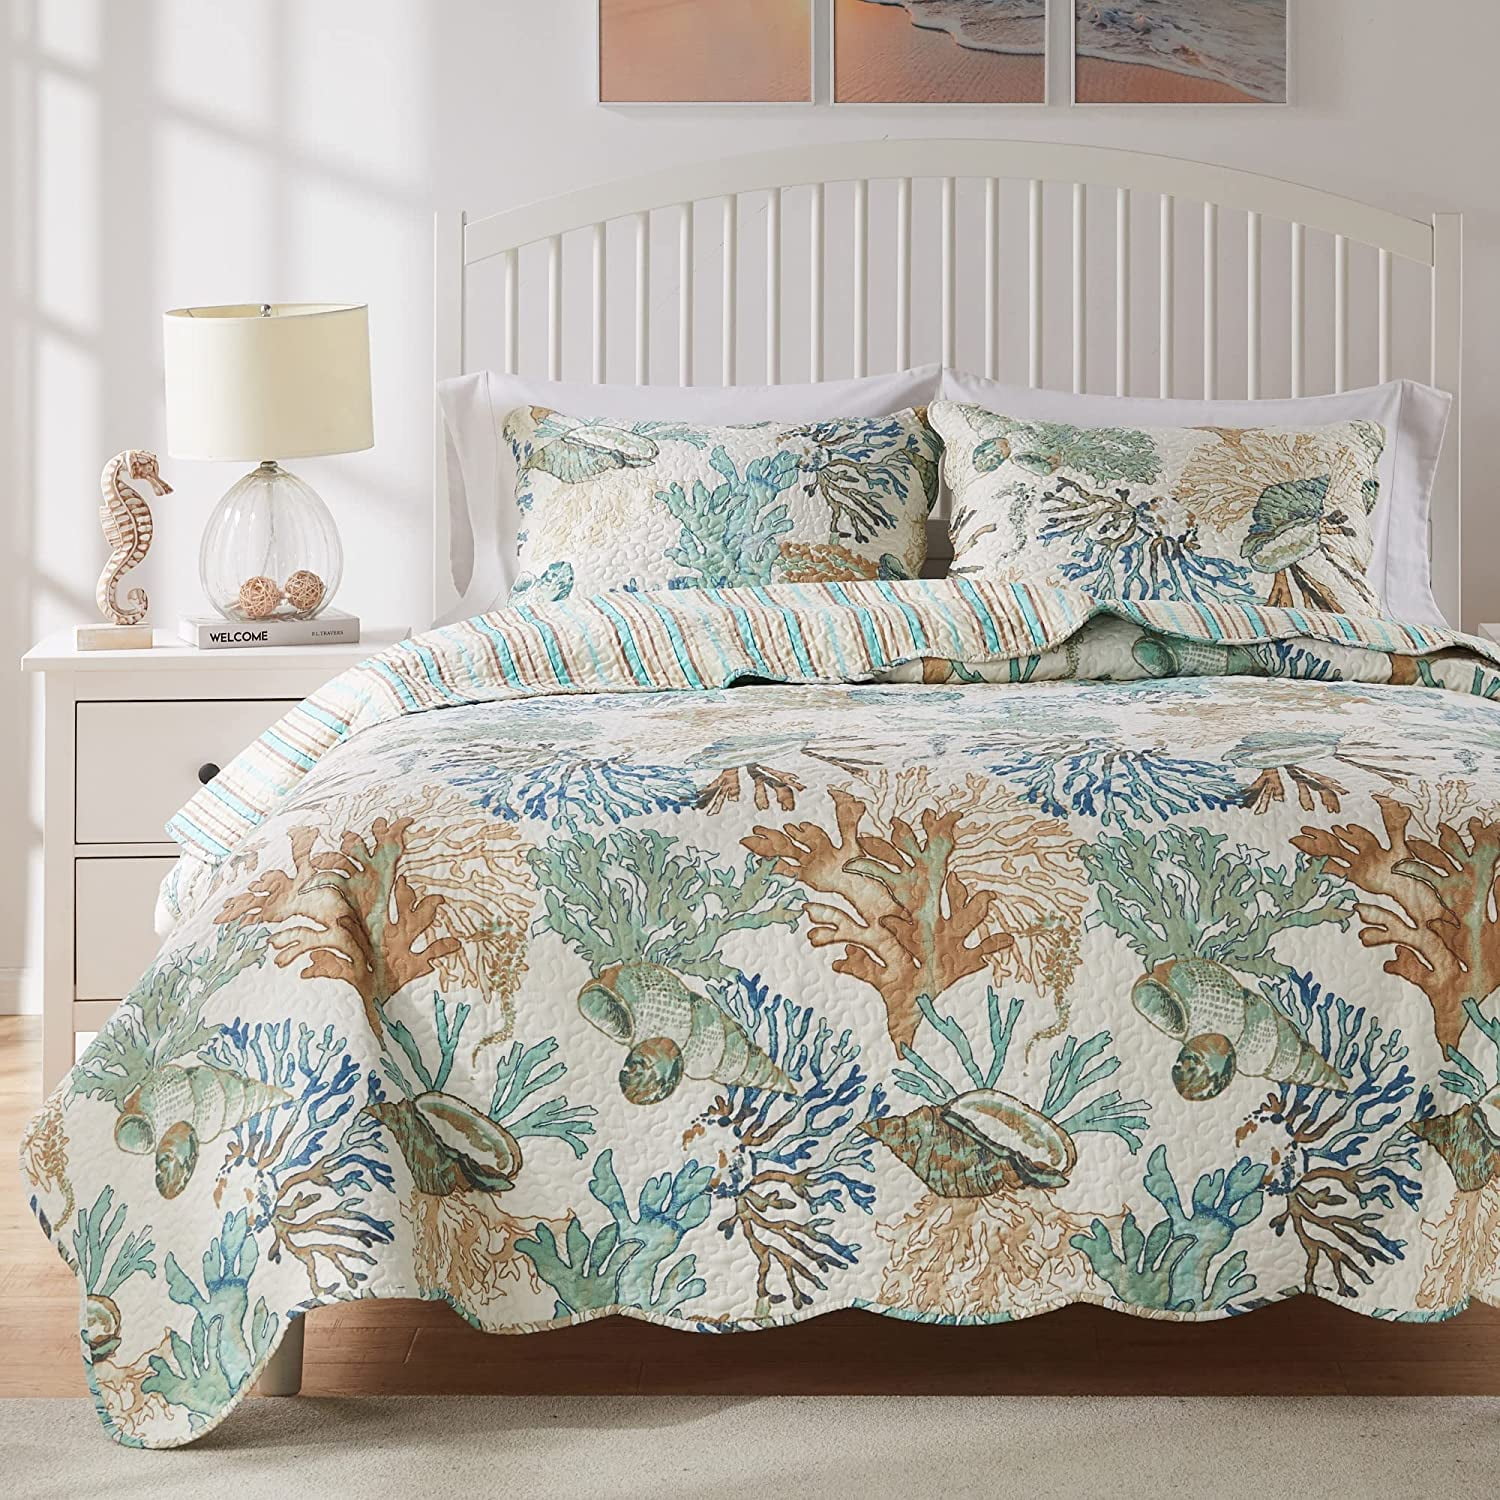 Details about   Lush Decor Blue and Coral Coastal Reef Quilt-Reversible 7 Piece Bedding Set with 